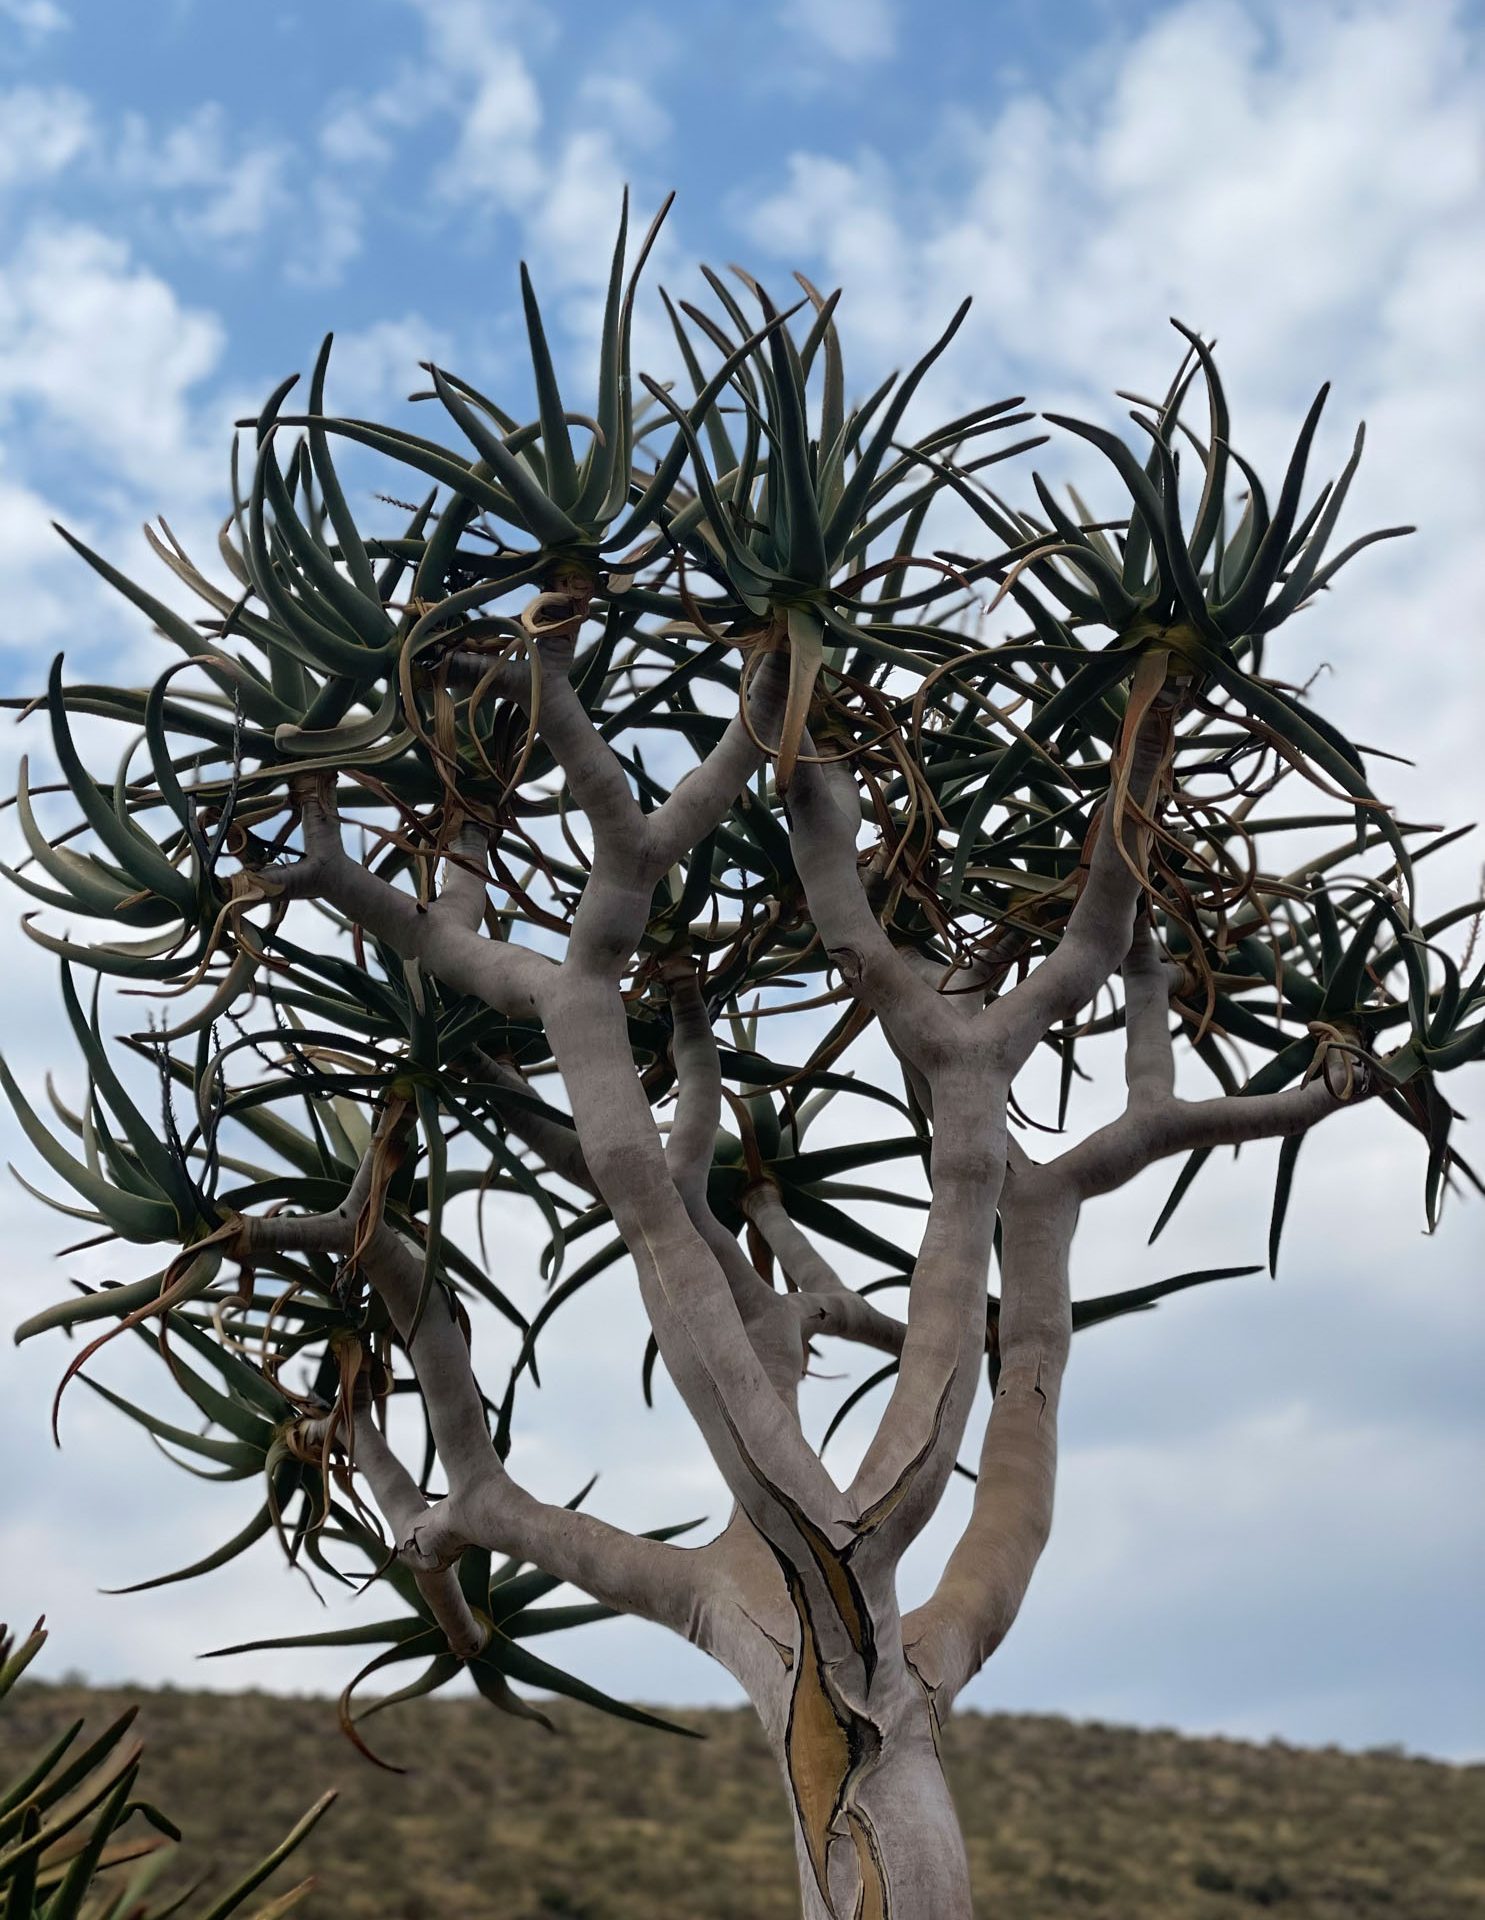 The kokerboom or 'quiver tree', is a tall, branching species of succulent plant, indigenous to Southern Africa